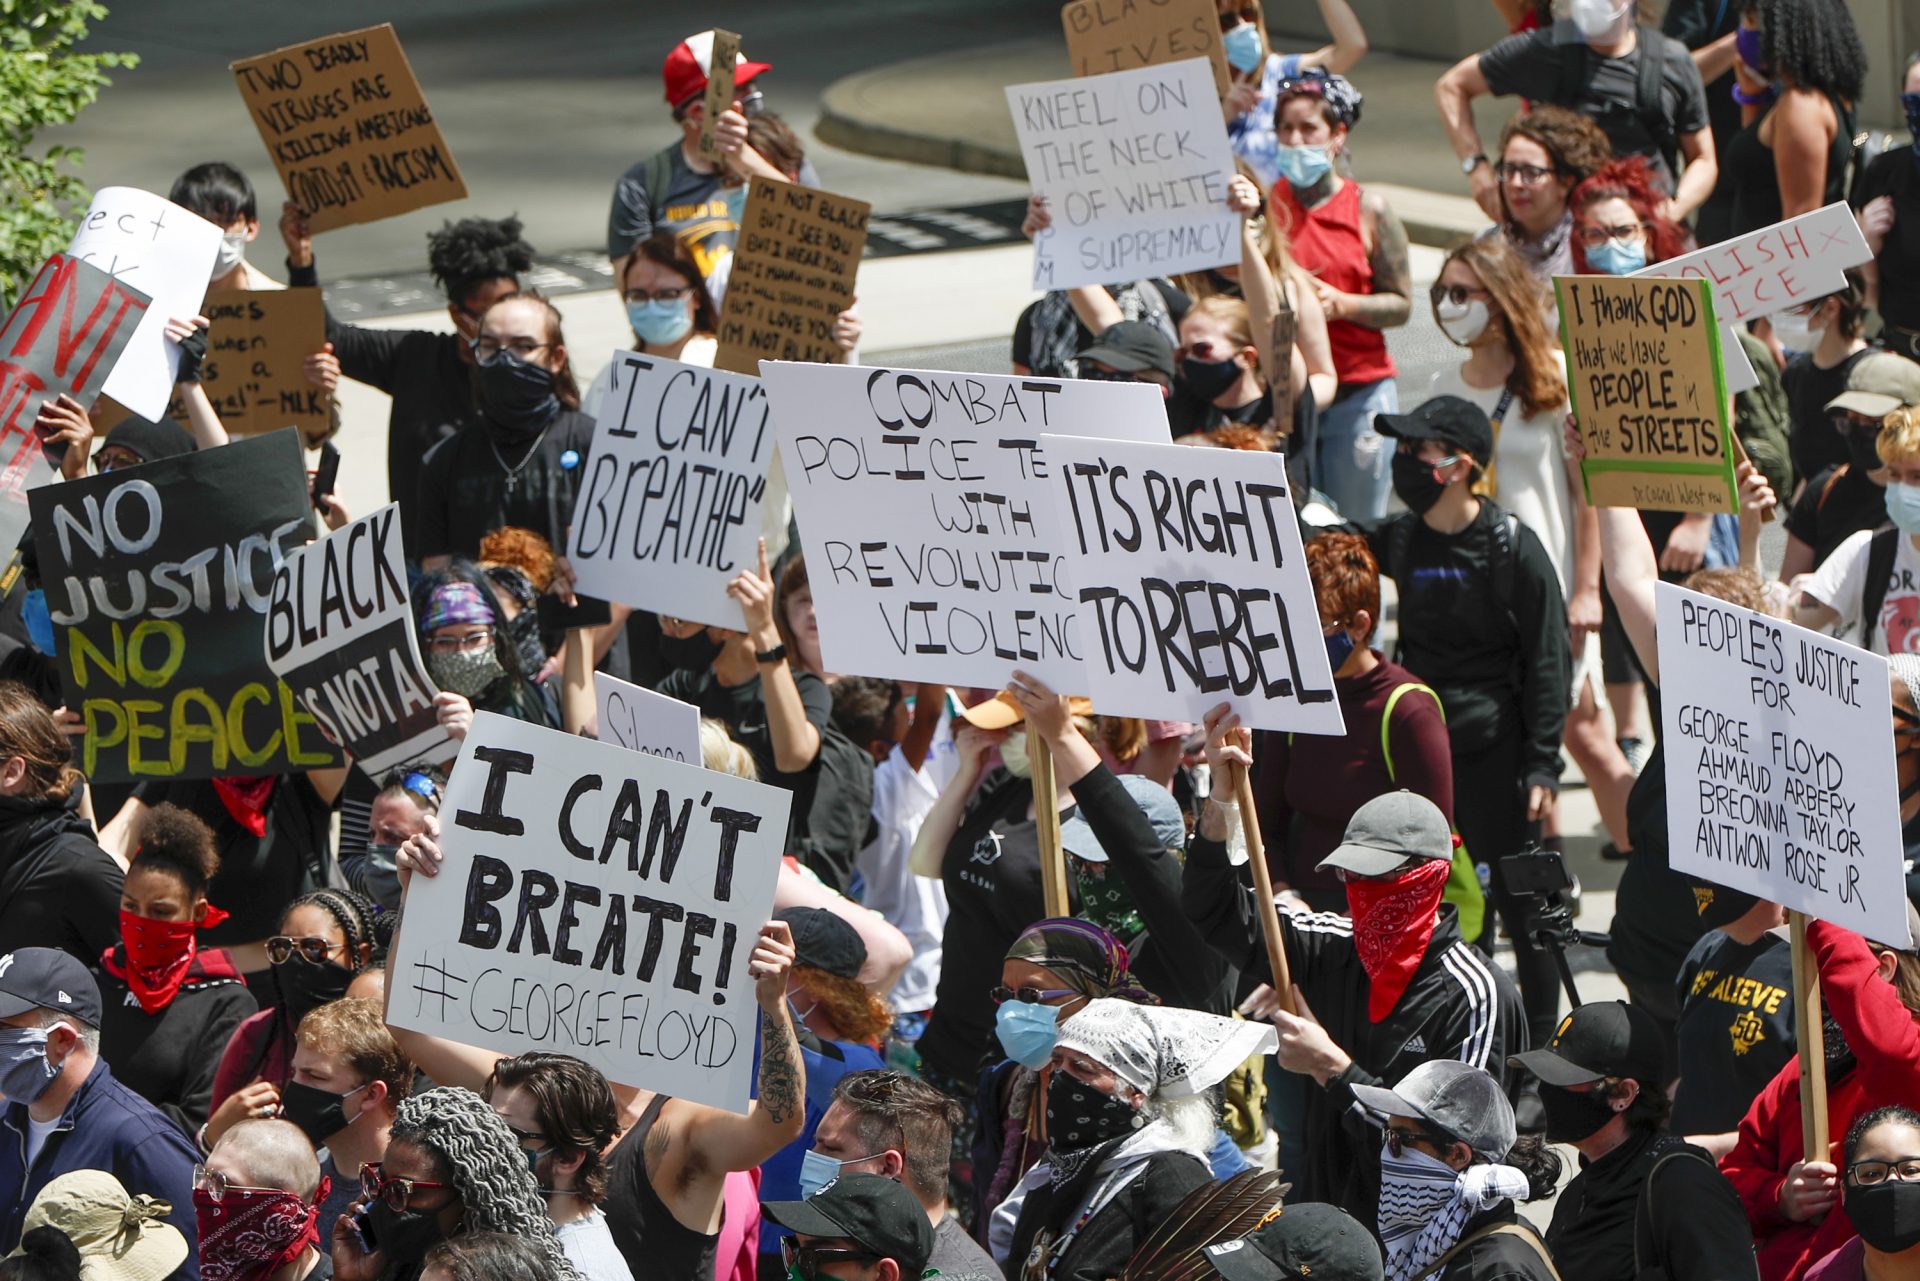 Demonstrators carry signs as they gather in a street during a march in Pittsburgh, Saturday, May 30, 2020 to protest the death of George Floyd, who died after being restrained by Minneapolis police officers on Memorial Day, May 25.